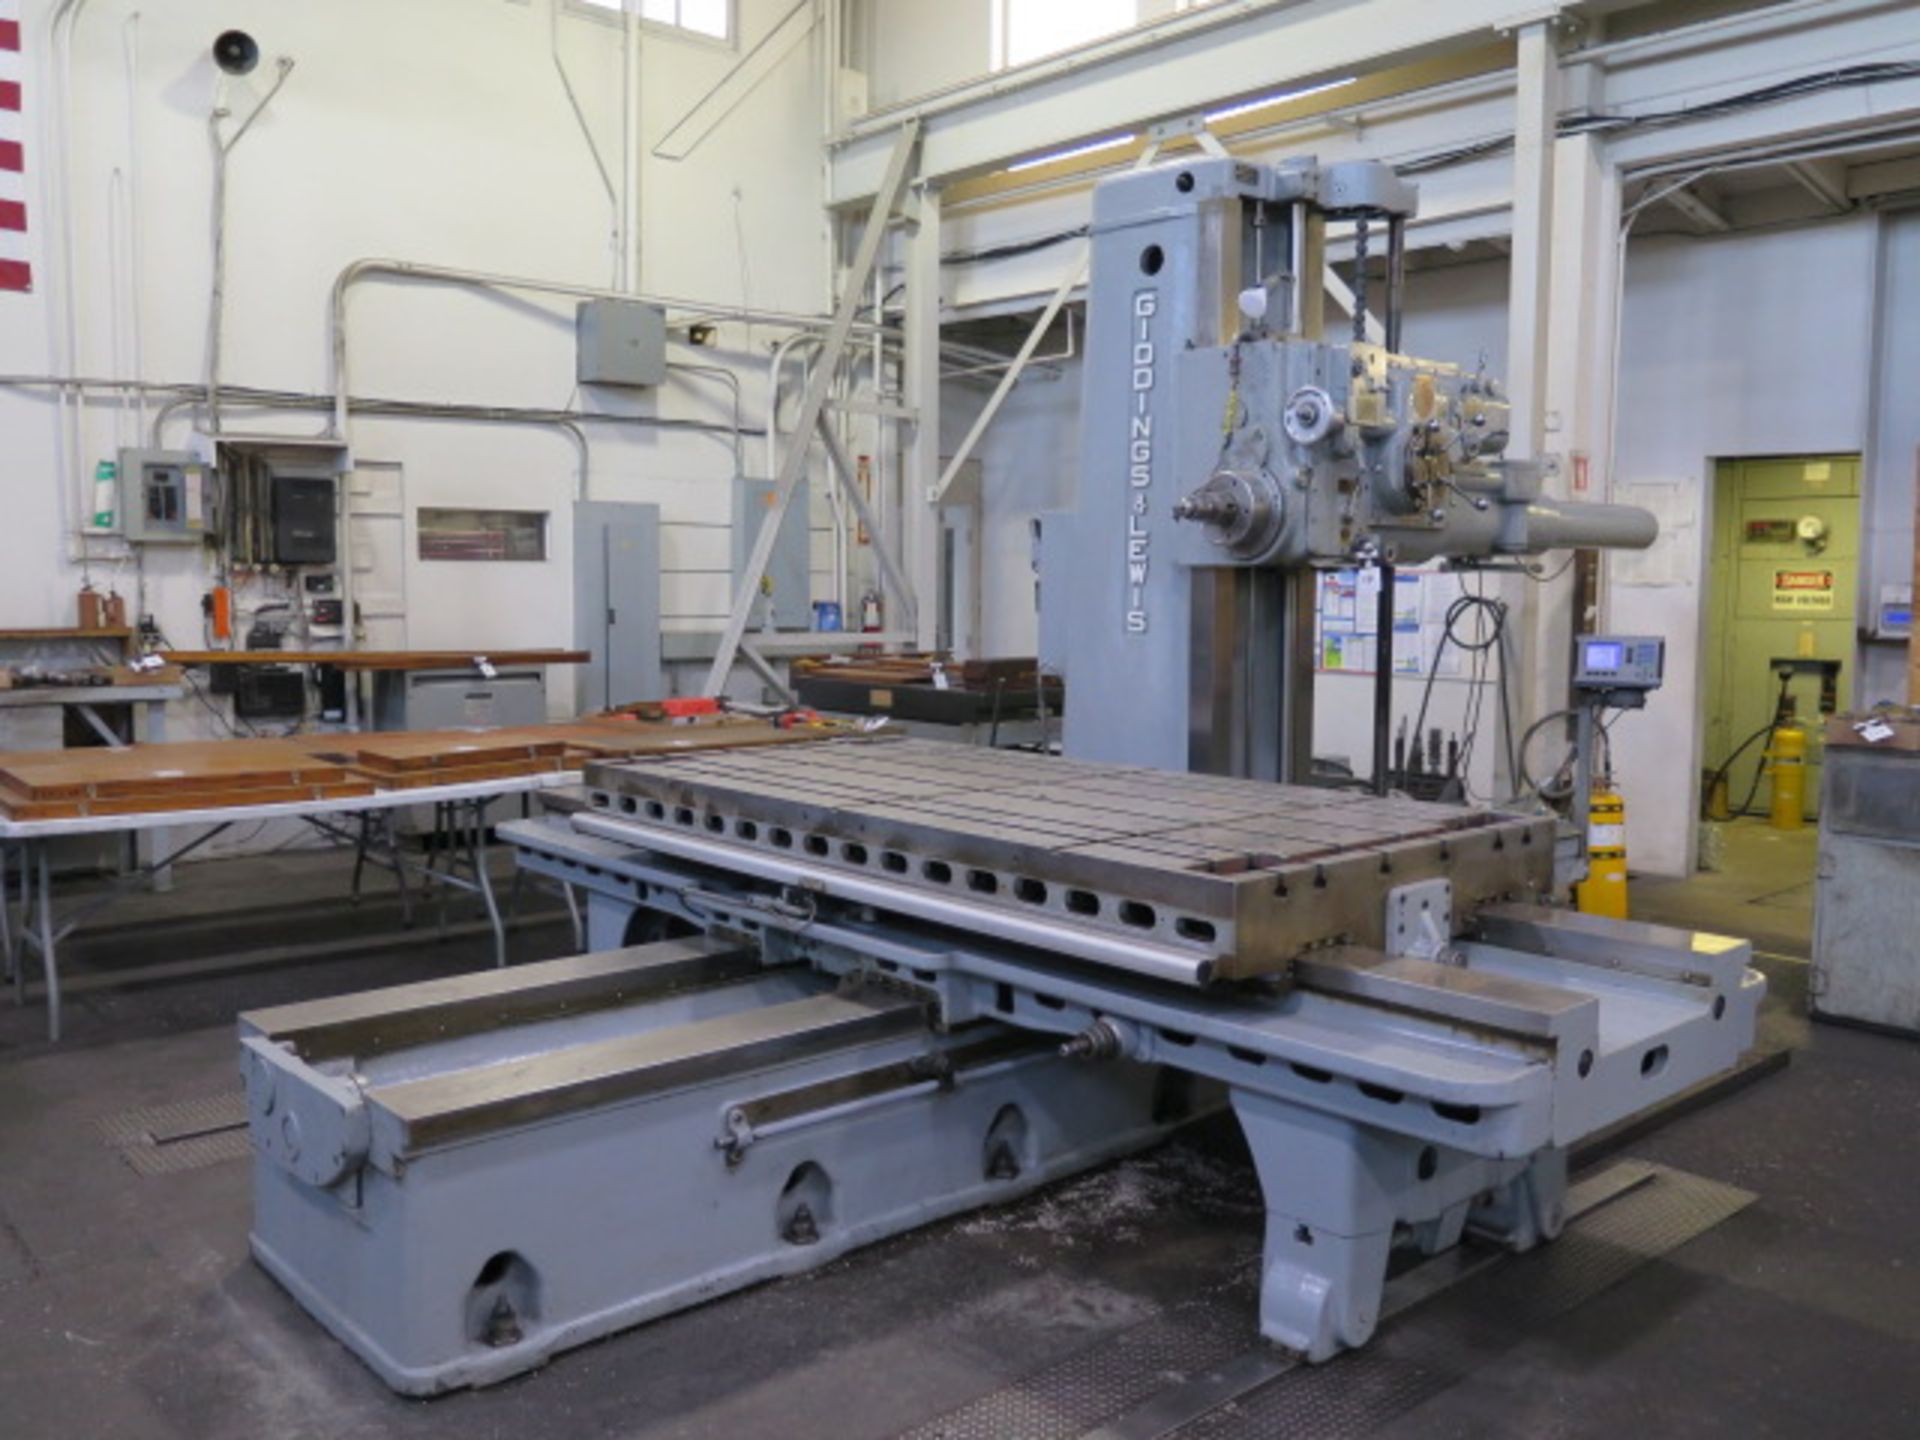 Giddings & Lewis 340-T Horizontal Boring Mill w/ Acu-Rite 4-Axis DRO, 4” Spindle, SOLD AS IS